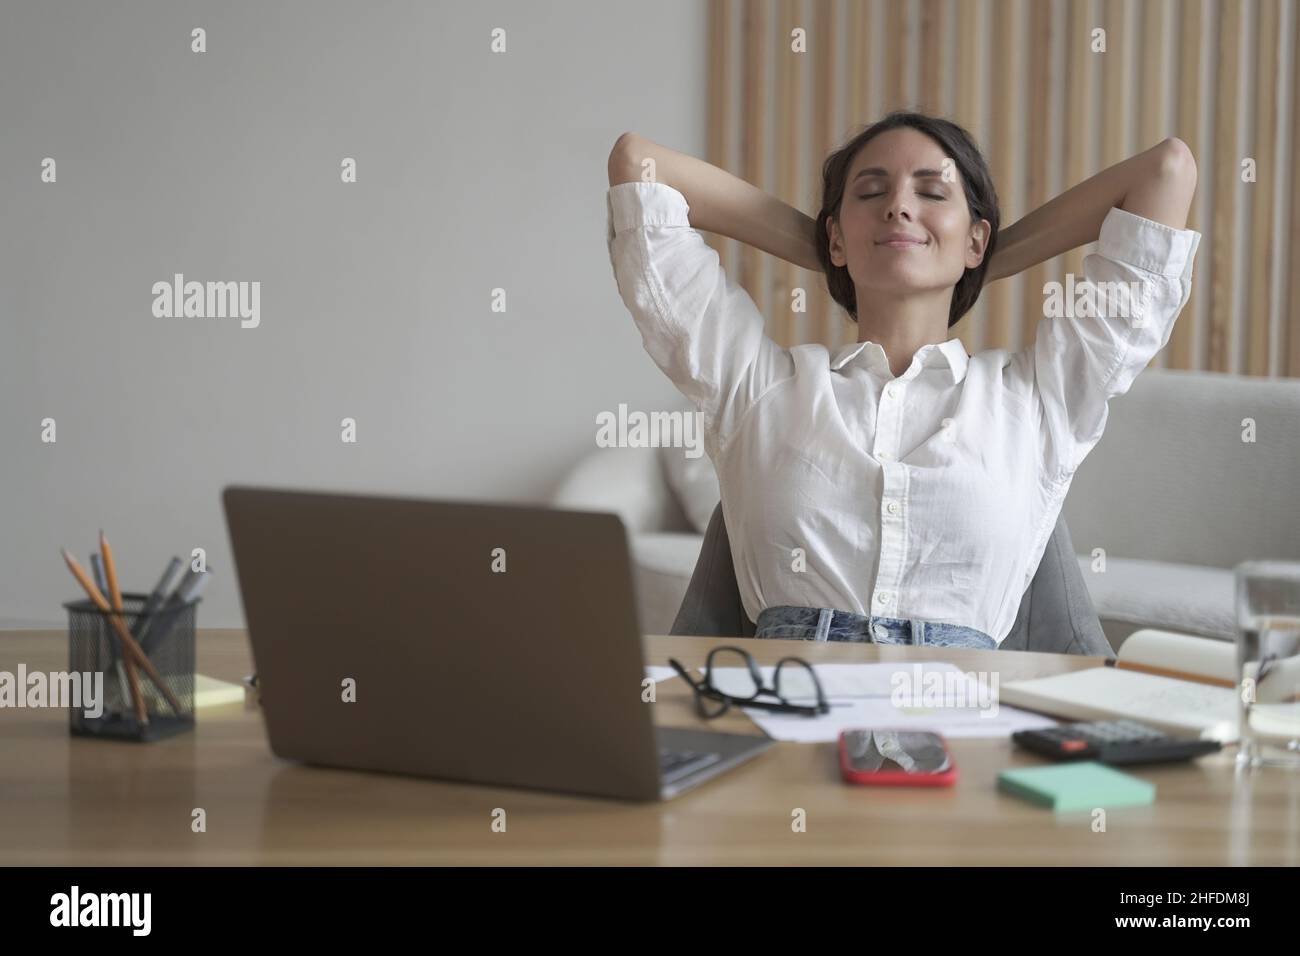 Young happy italian woman with hands behind head relaxing at workplace in home office Stock Photo